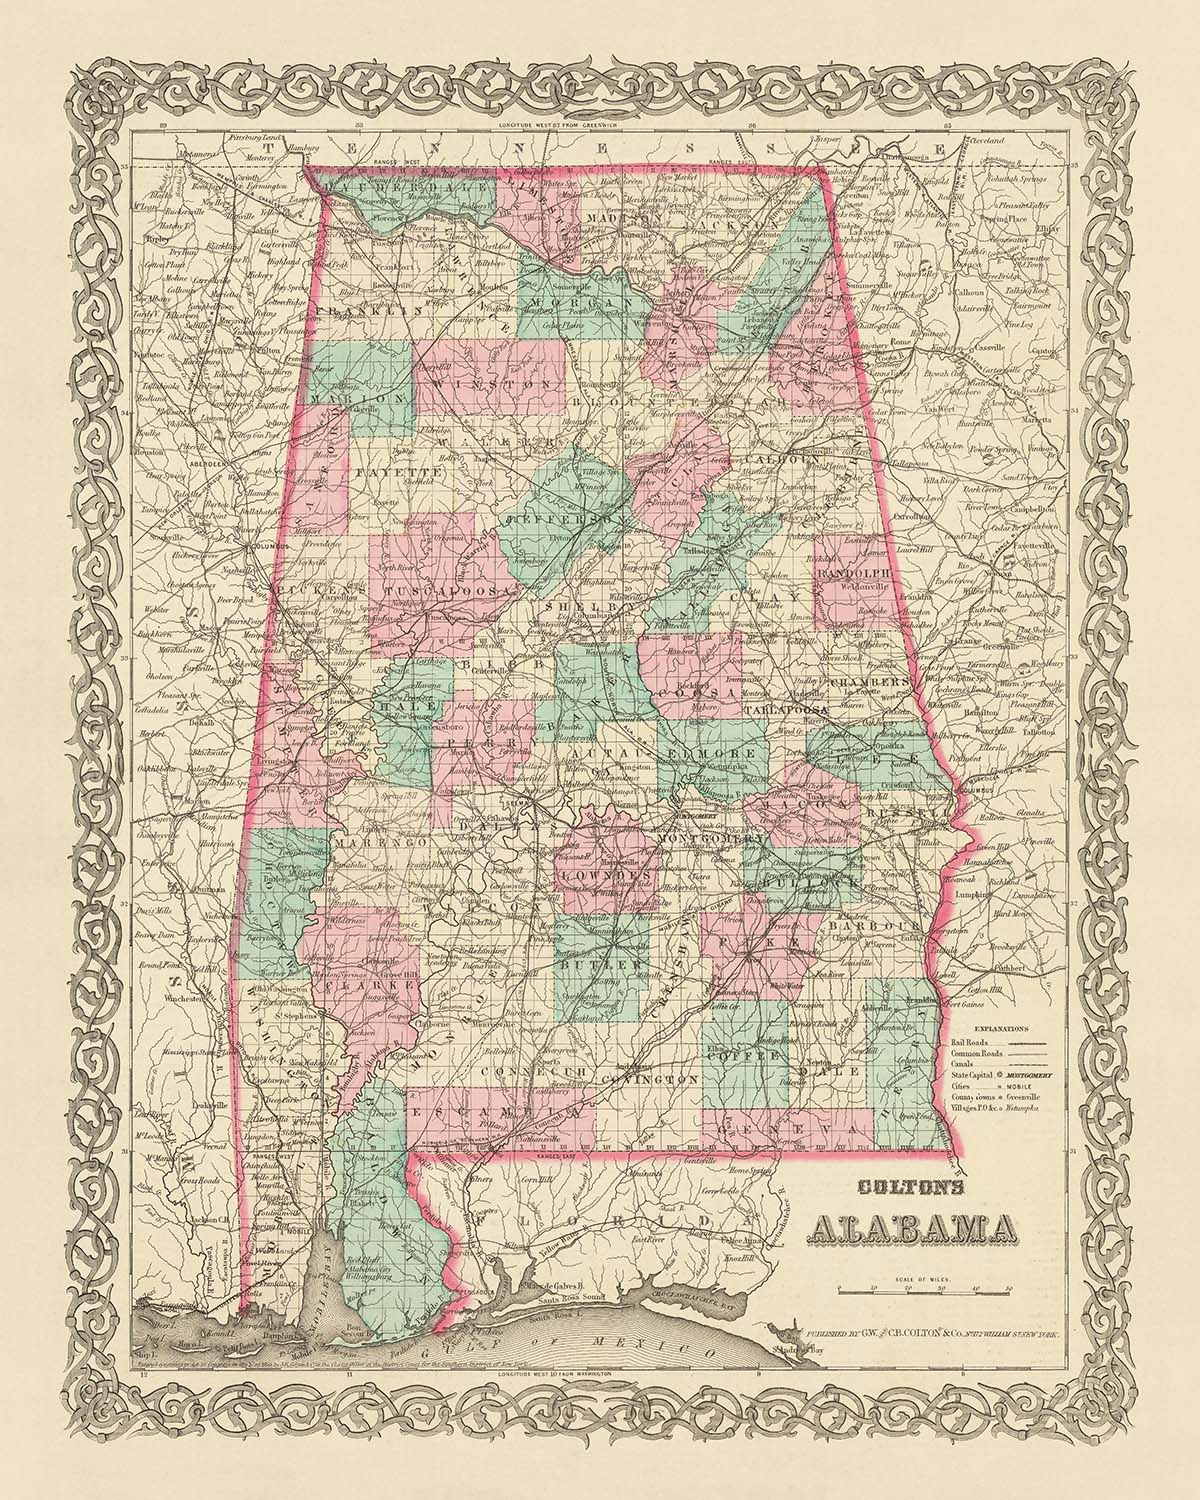 Old Map of Alabama, 1855 by J.H. Colton: Mobile, Montgomery, Huntsville, Tuscaloosa, and Selma